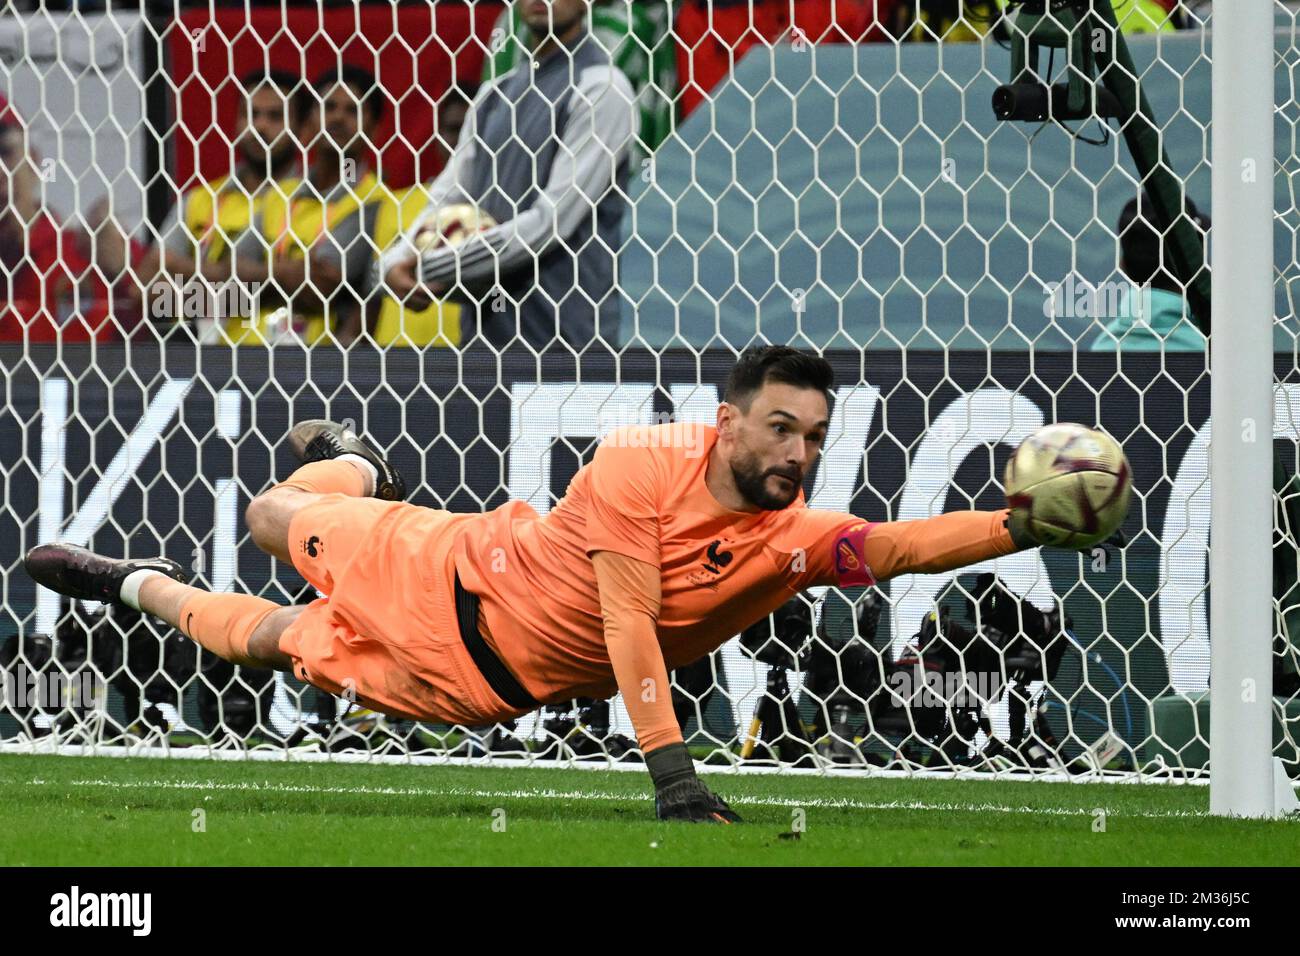 DOHA (QATAR), 12/14/2022 - WORLD CUP/FRANCE vs MOROCCO - Goalkeeper LLORIS Hugo of France makes a save in the match between the selections of France vs Morocco, for the semifinal of the World Cup Qatar 2022/Fifa, at Al Bayt Stadium, in Doha, this Wednesday (14). Photo by Alexandre Brum/Ag. frame 31119 (Alexandre Brum/Ag. Enquadrar/SPP) Credit: SPP Sport Press Photo. /Alamy Live News Stock Photo